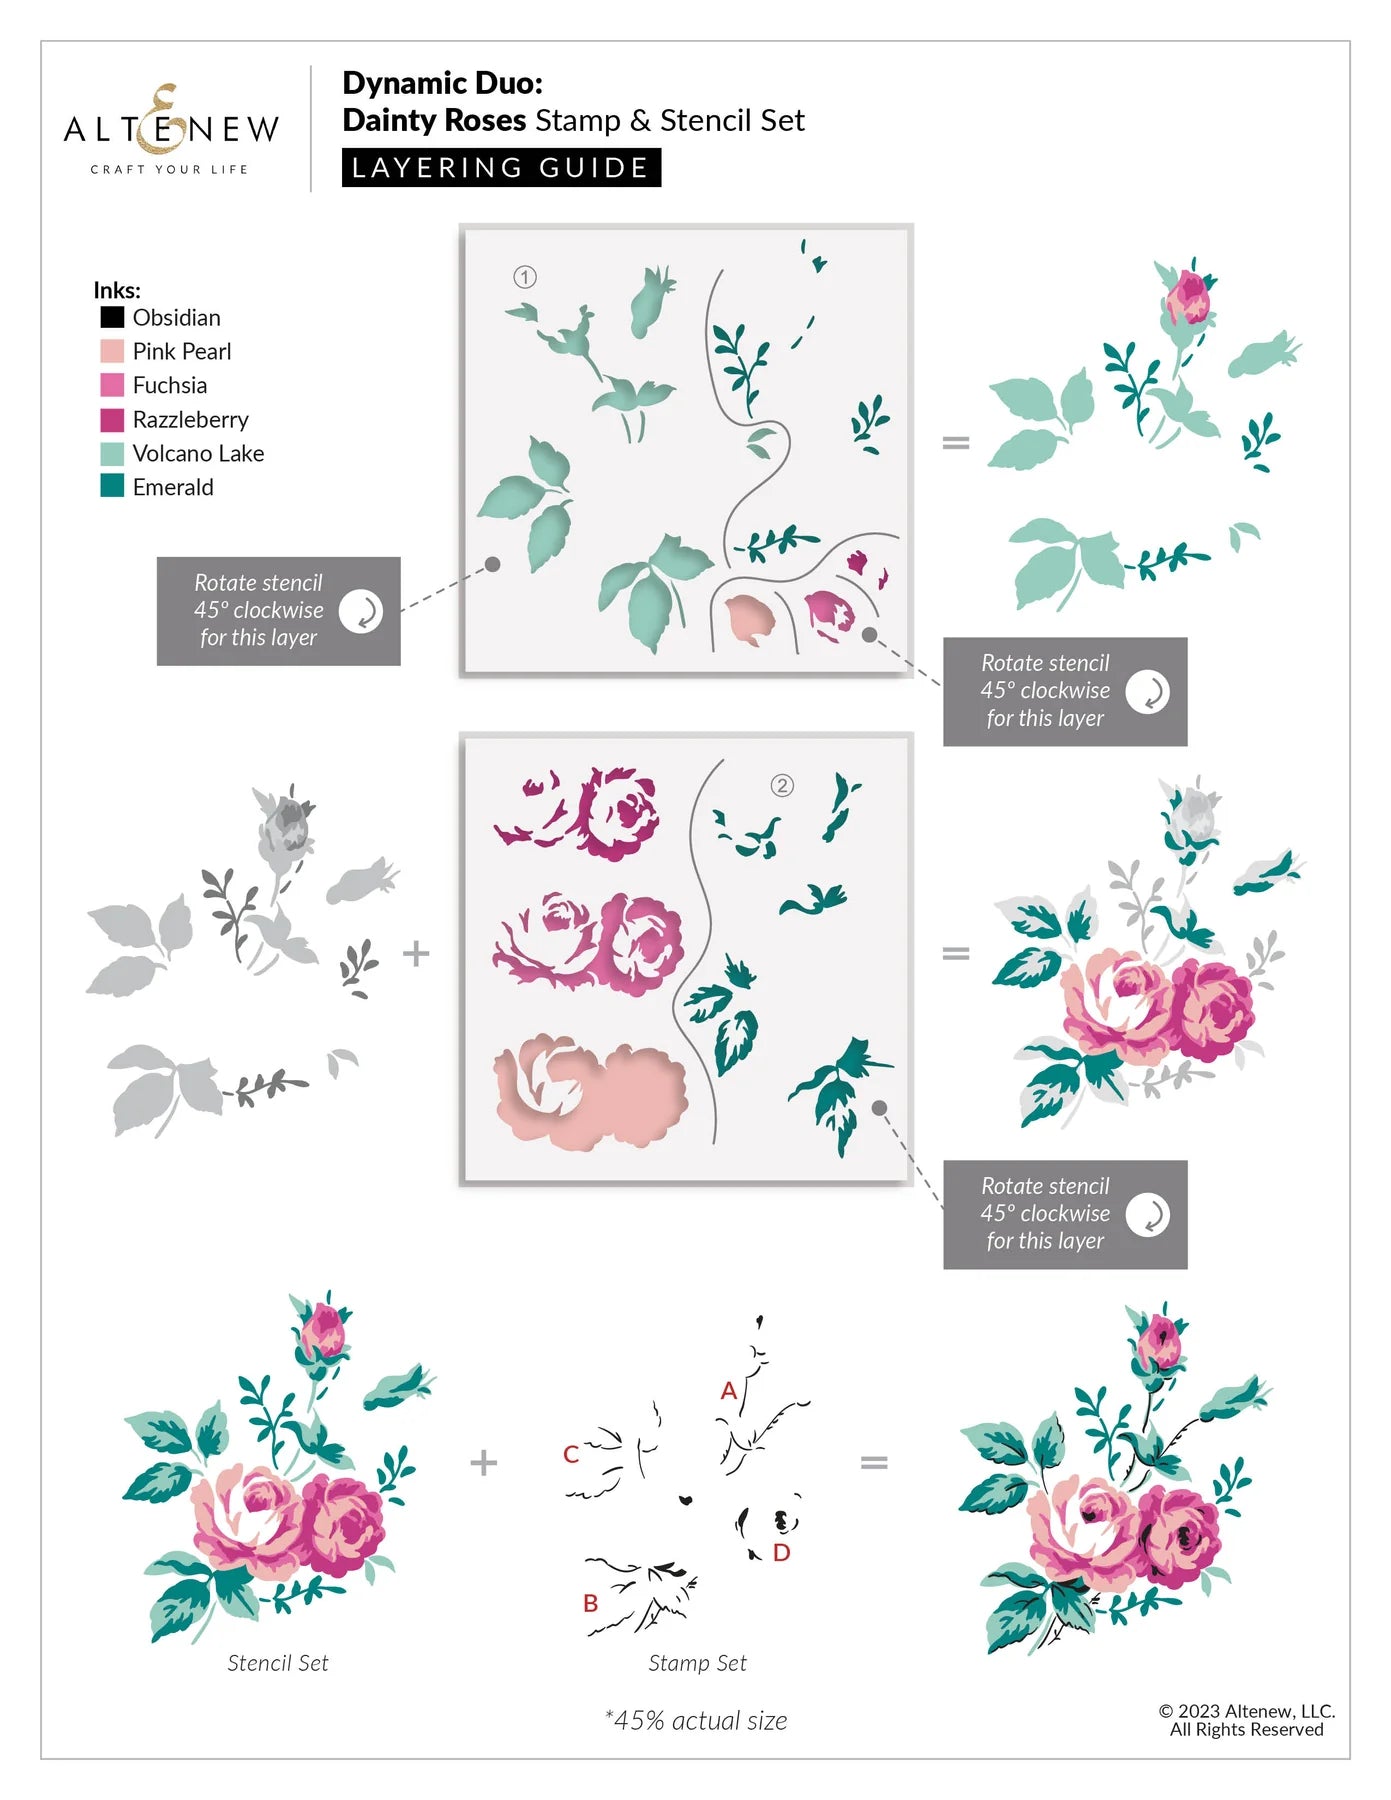  Altenew Vintage Garden Floral Simple Coloring Stencil Set,  Easy Color Blending, Layered Flowers, Stencil and Stamp and Die, Crafting  Bundle, Arts and Crafts : Arts, Crafts & Sewing